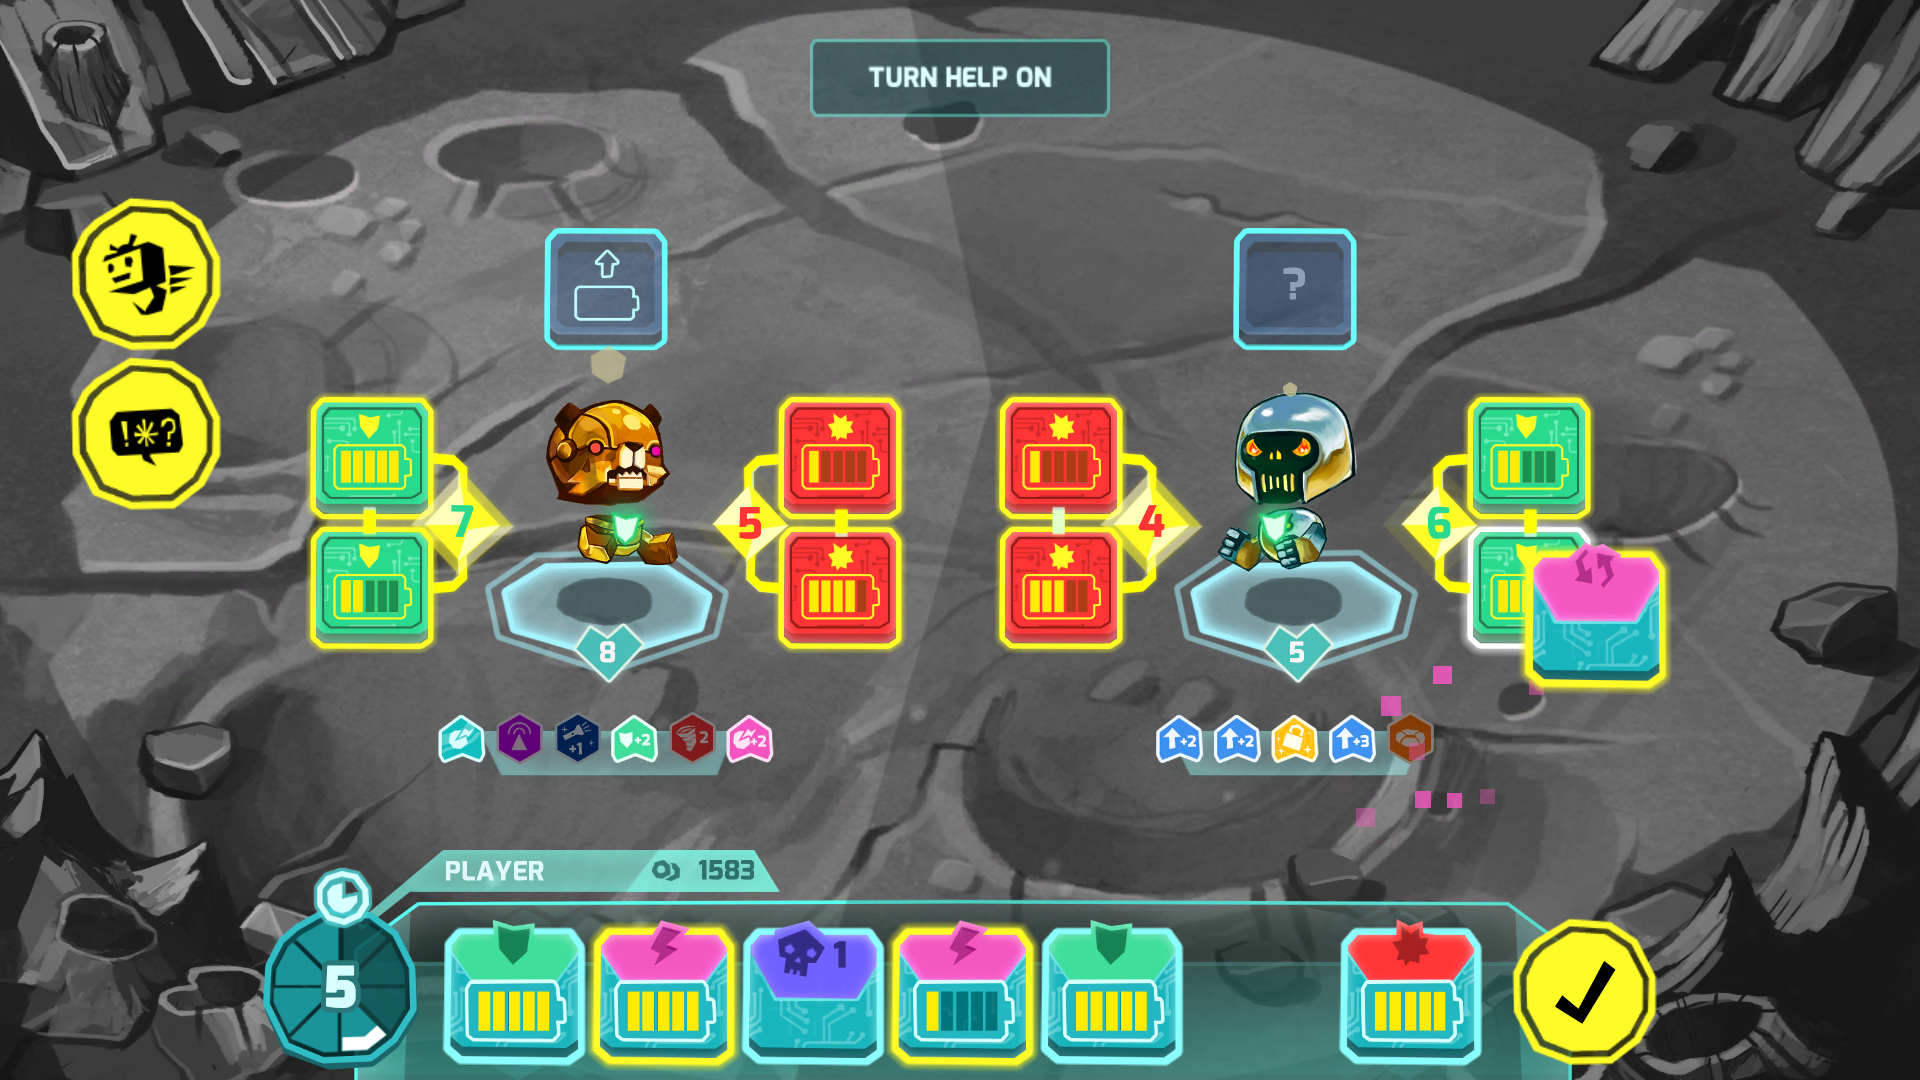 Gameplay footage from the battle phase of Insane Robots